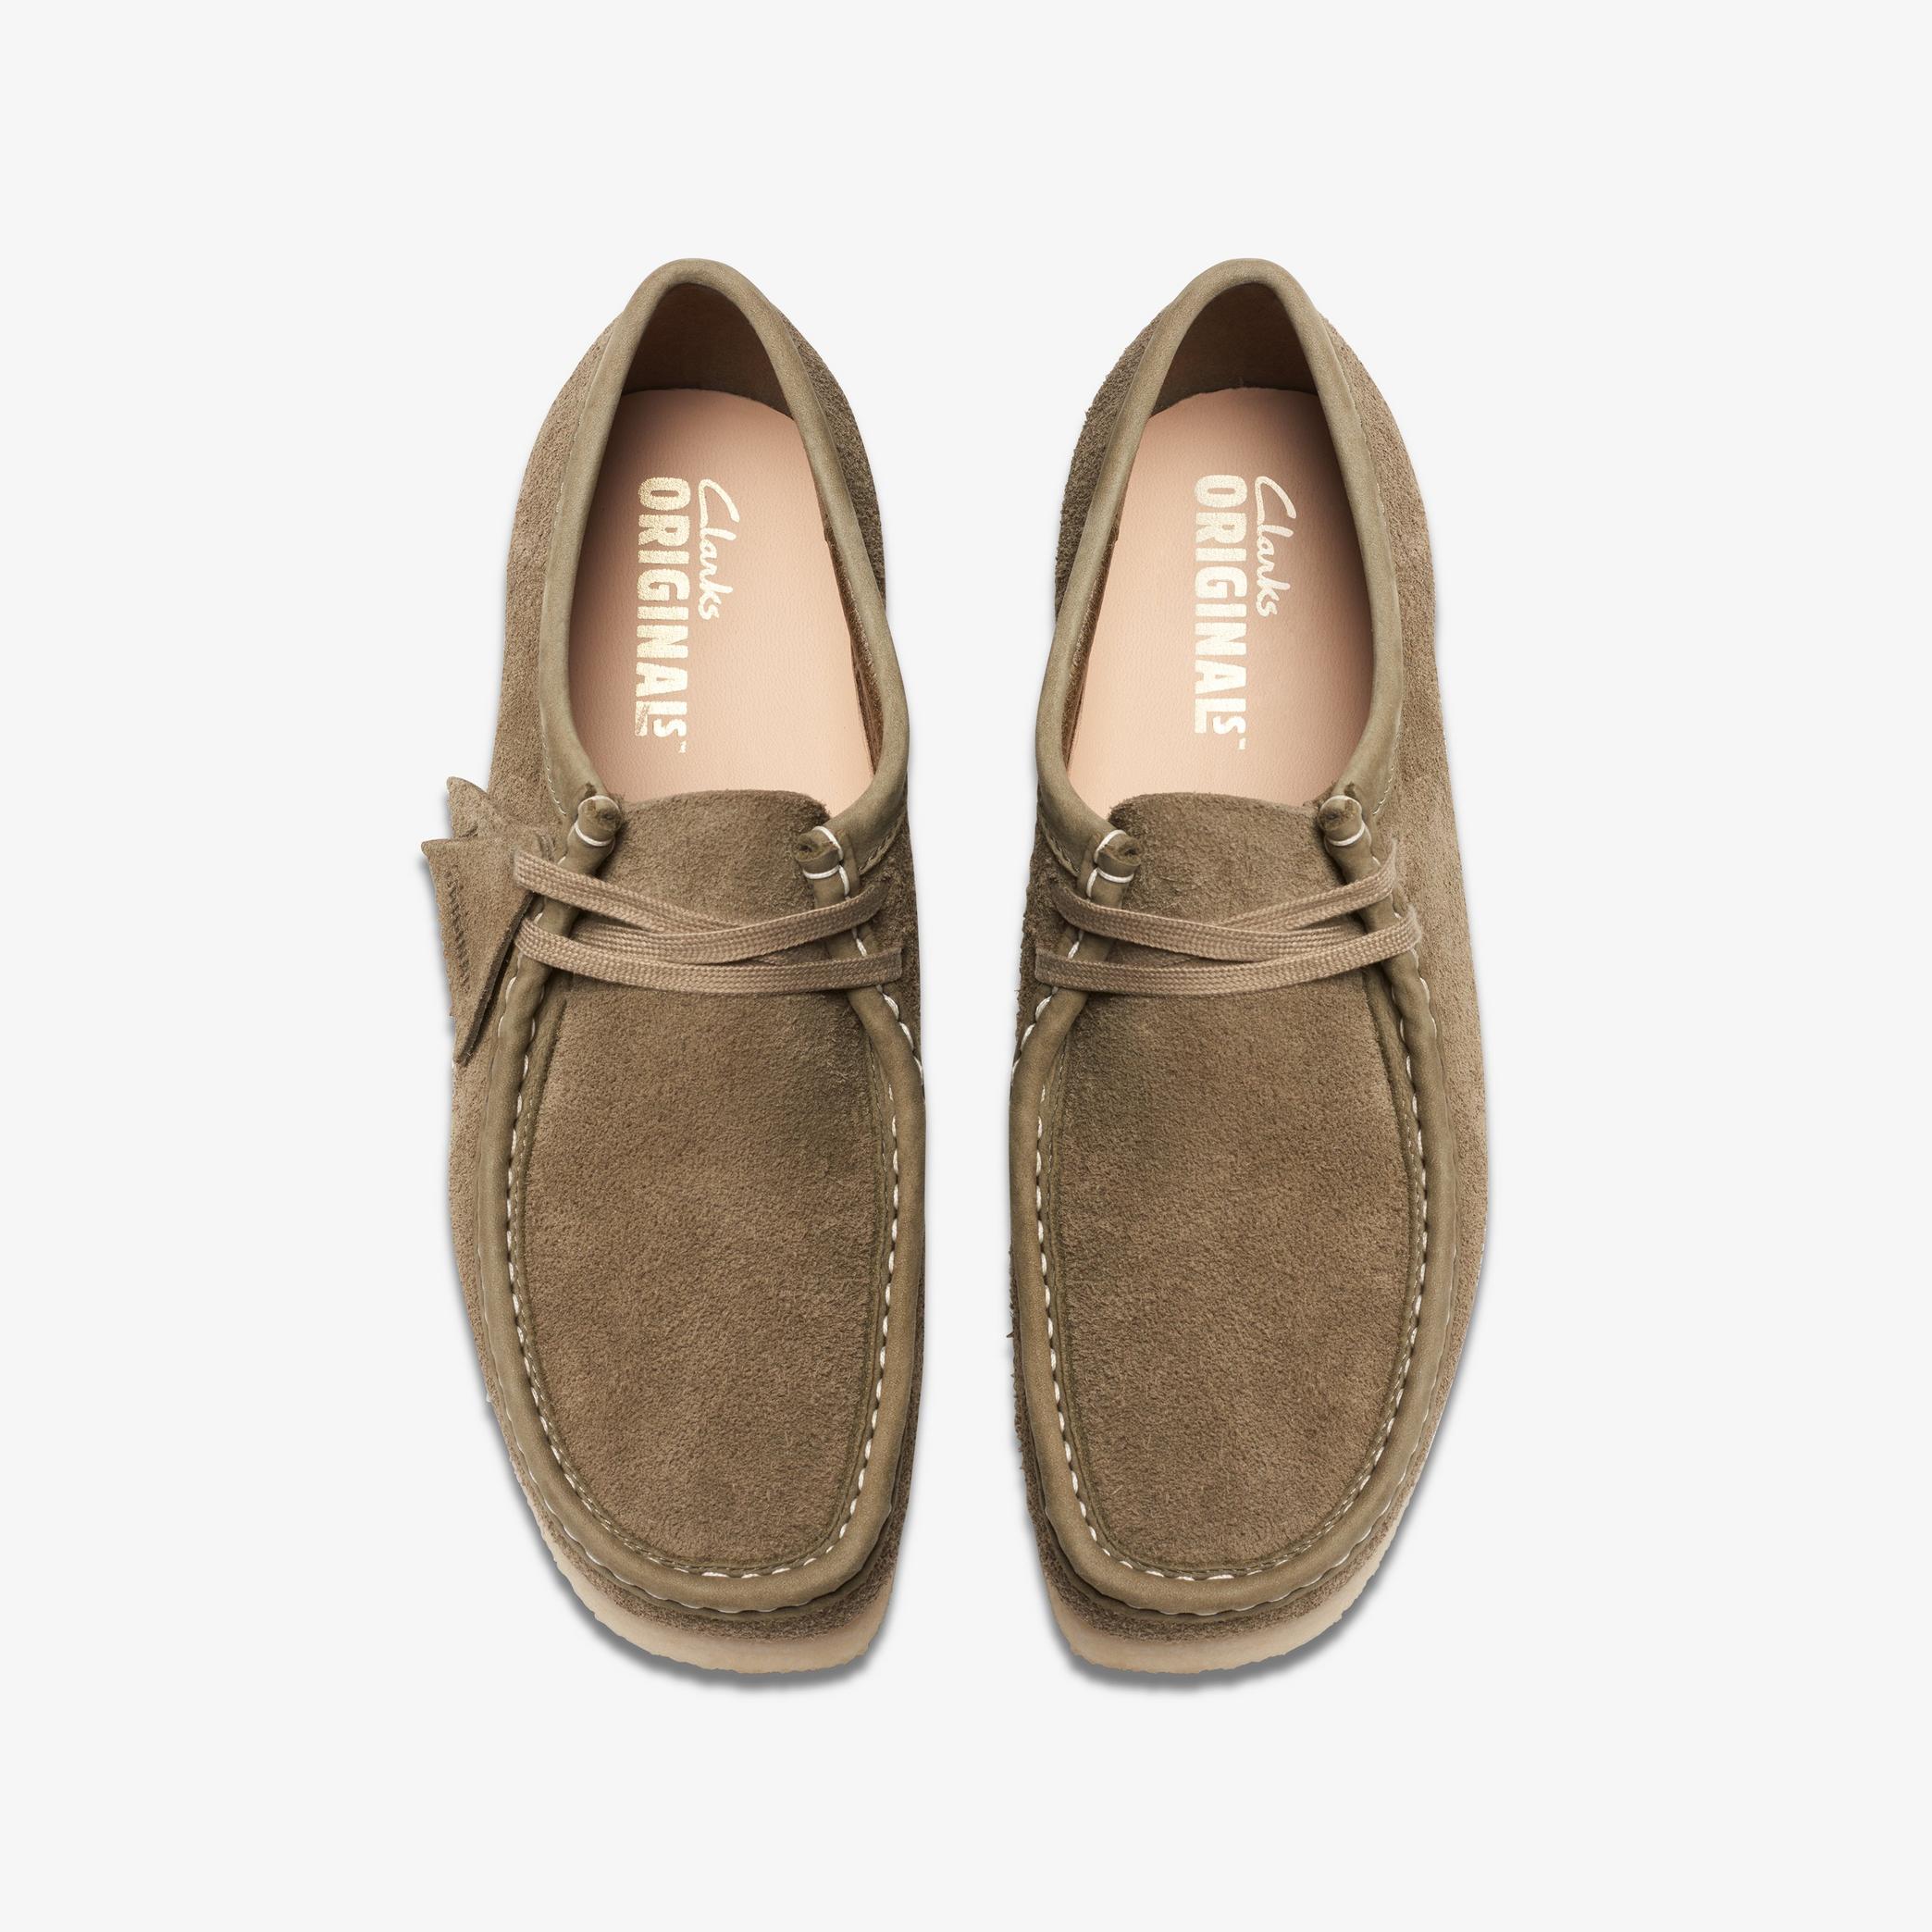 Wallabee Pale Khaki Suede Wallabee, view 6 of 7